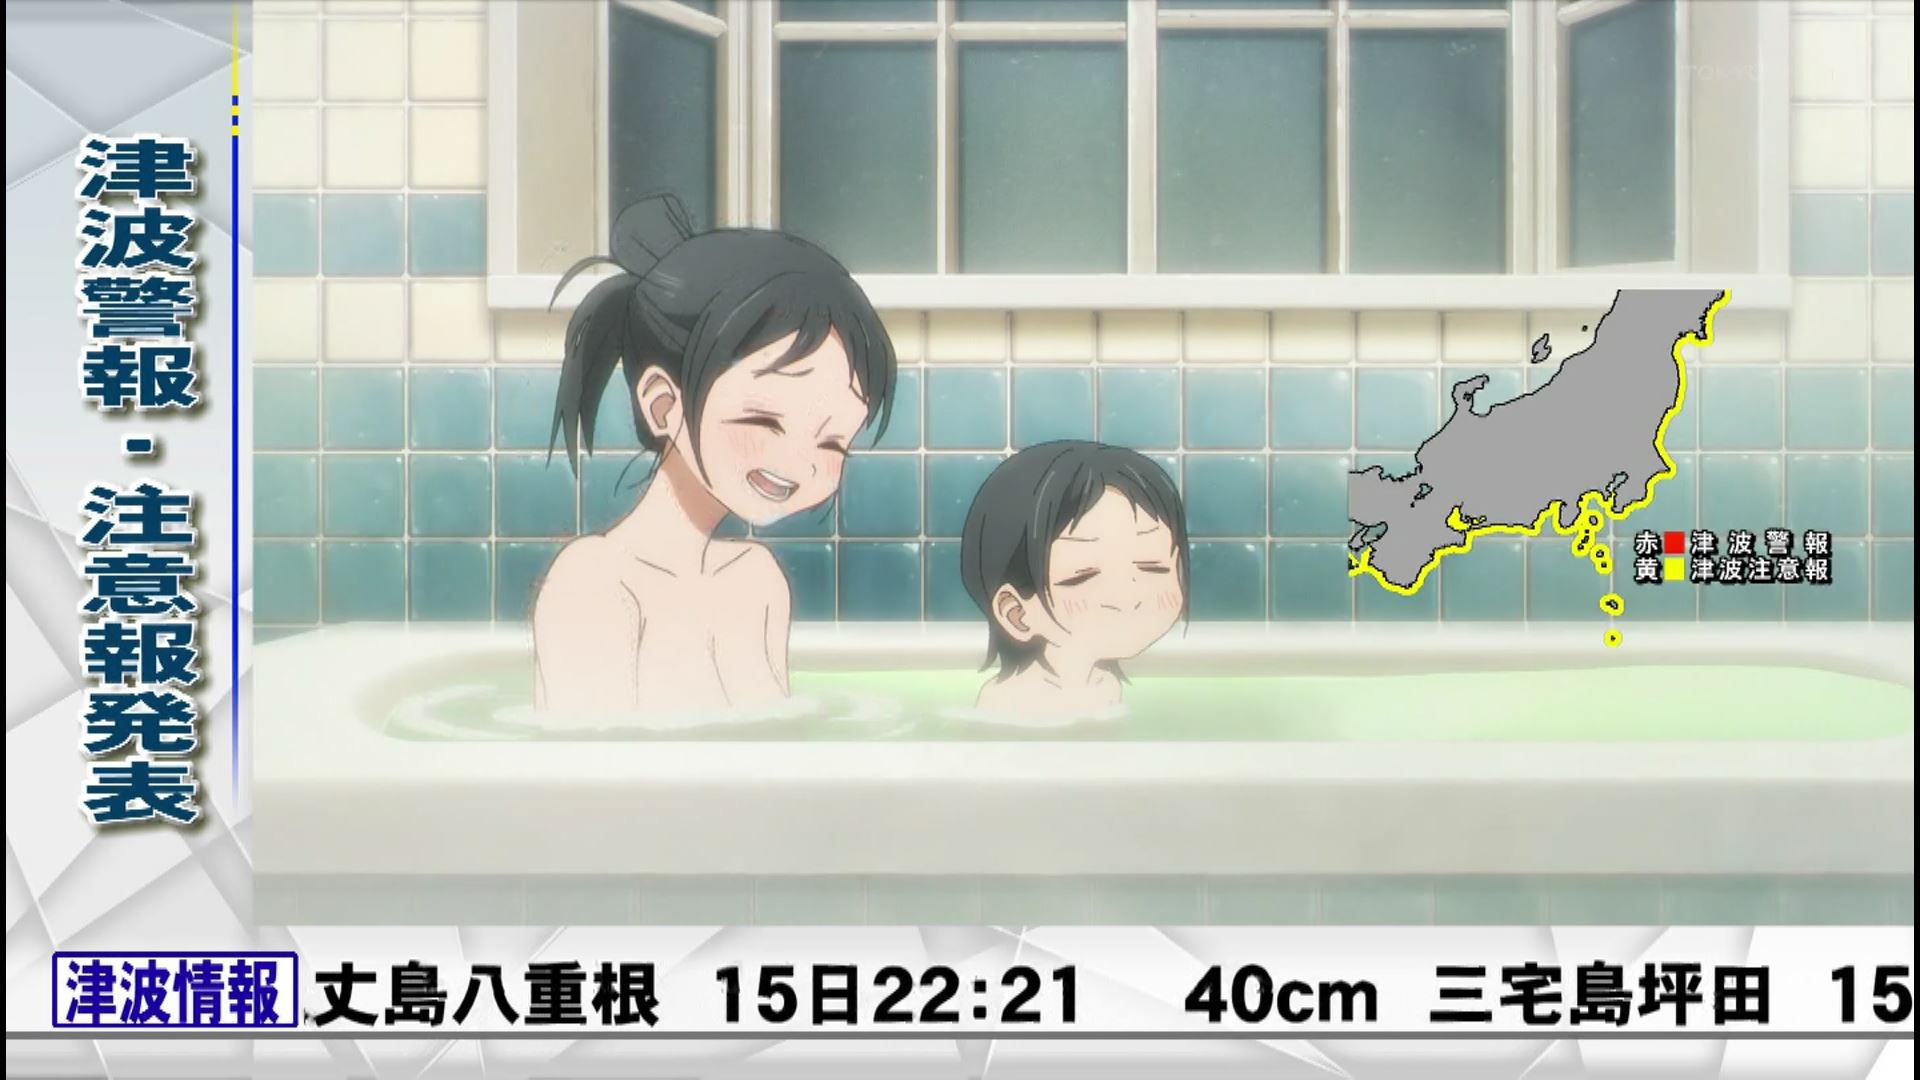 In the anime "Tomorrow-chan's Sailor Suit" episode 2, the girl's erotic bathing scene and the punchy scene 17